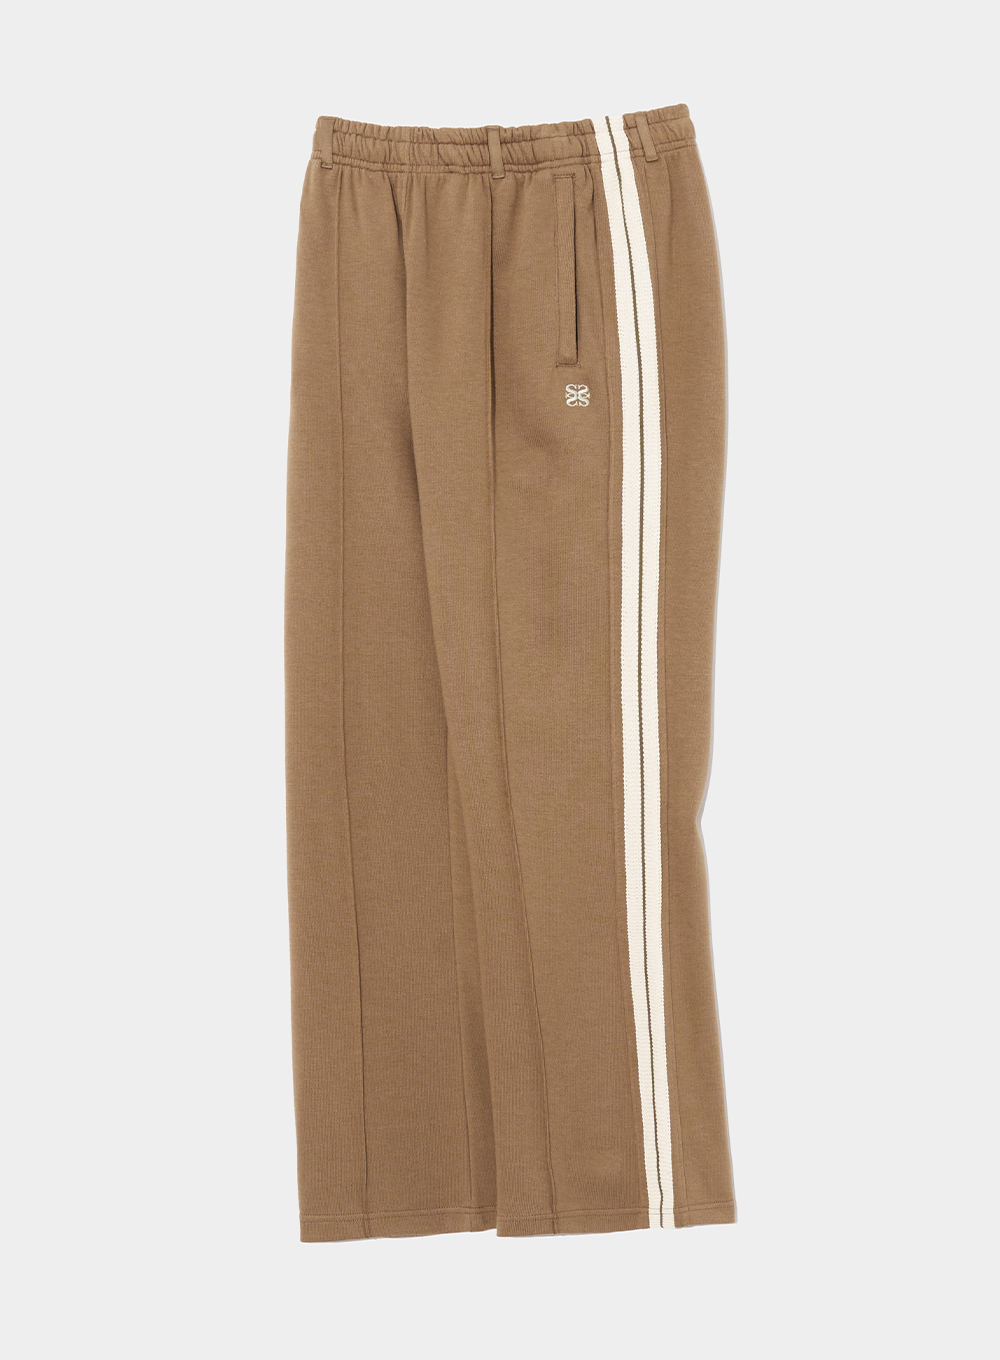 (W) Lawton All Day Track Pants - Light Brown